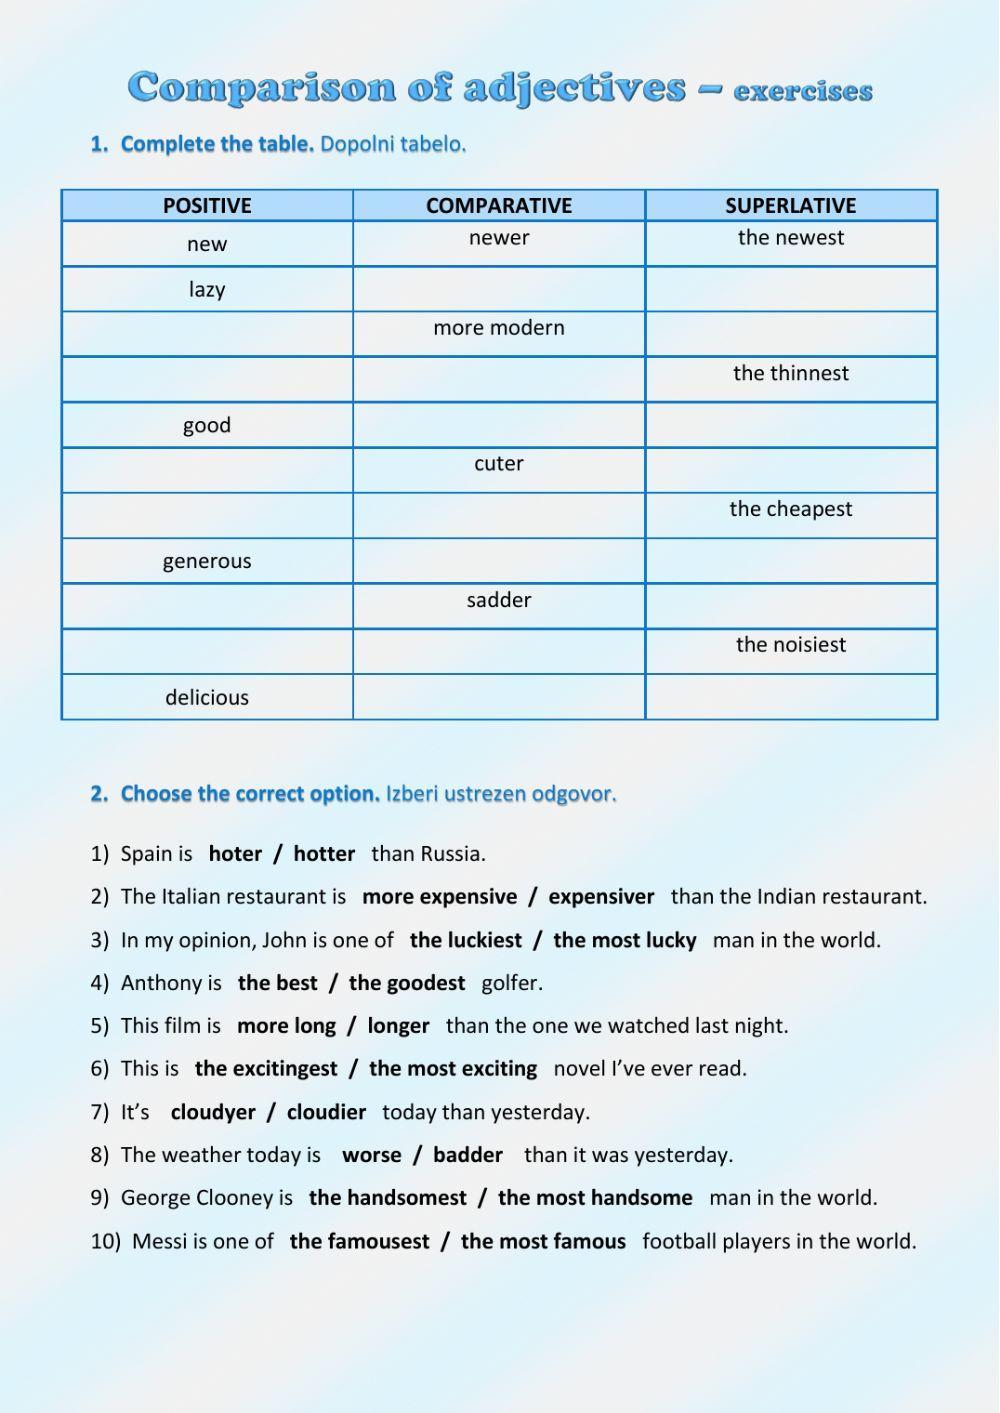 Comparison of adjectives - exercises